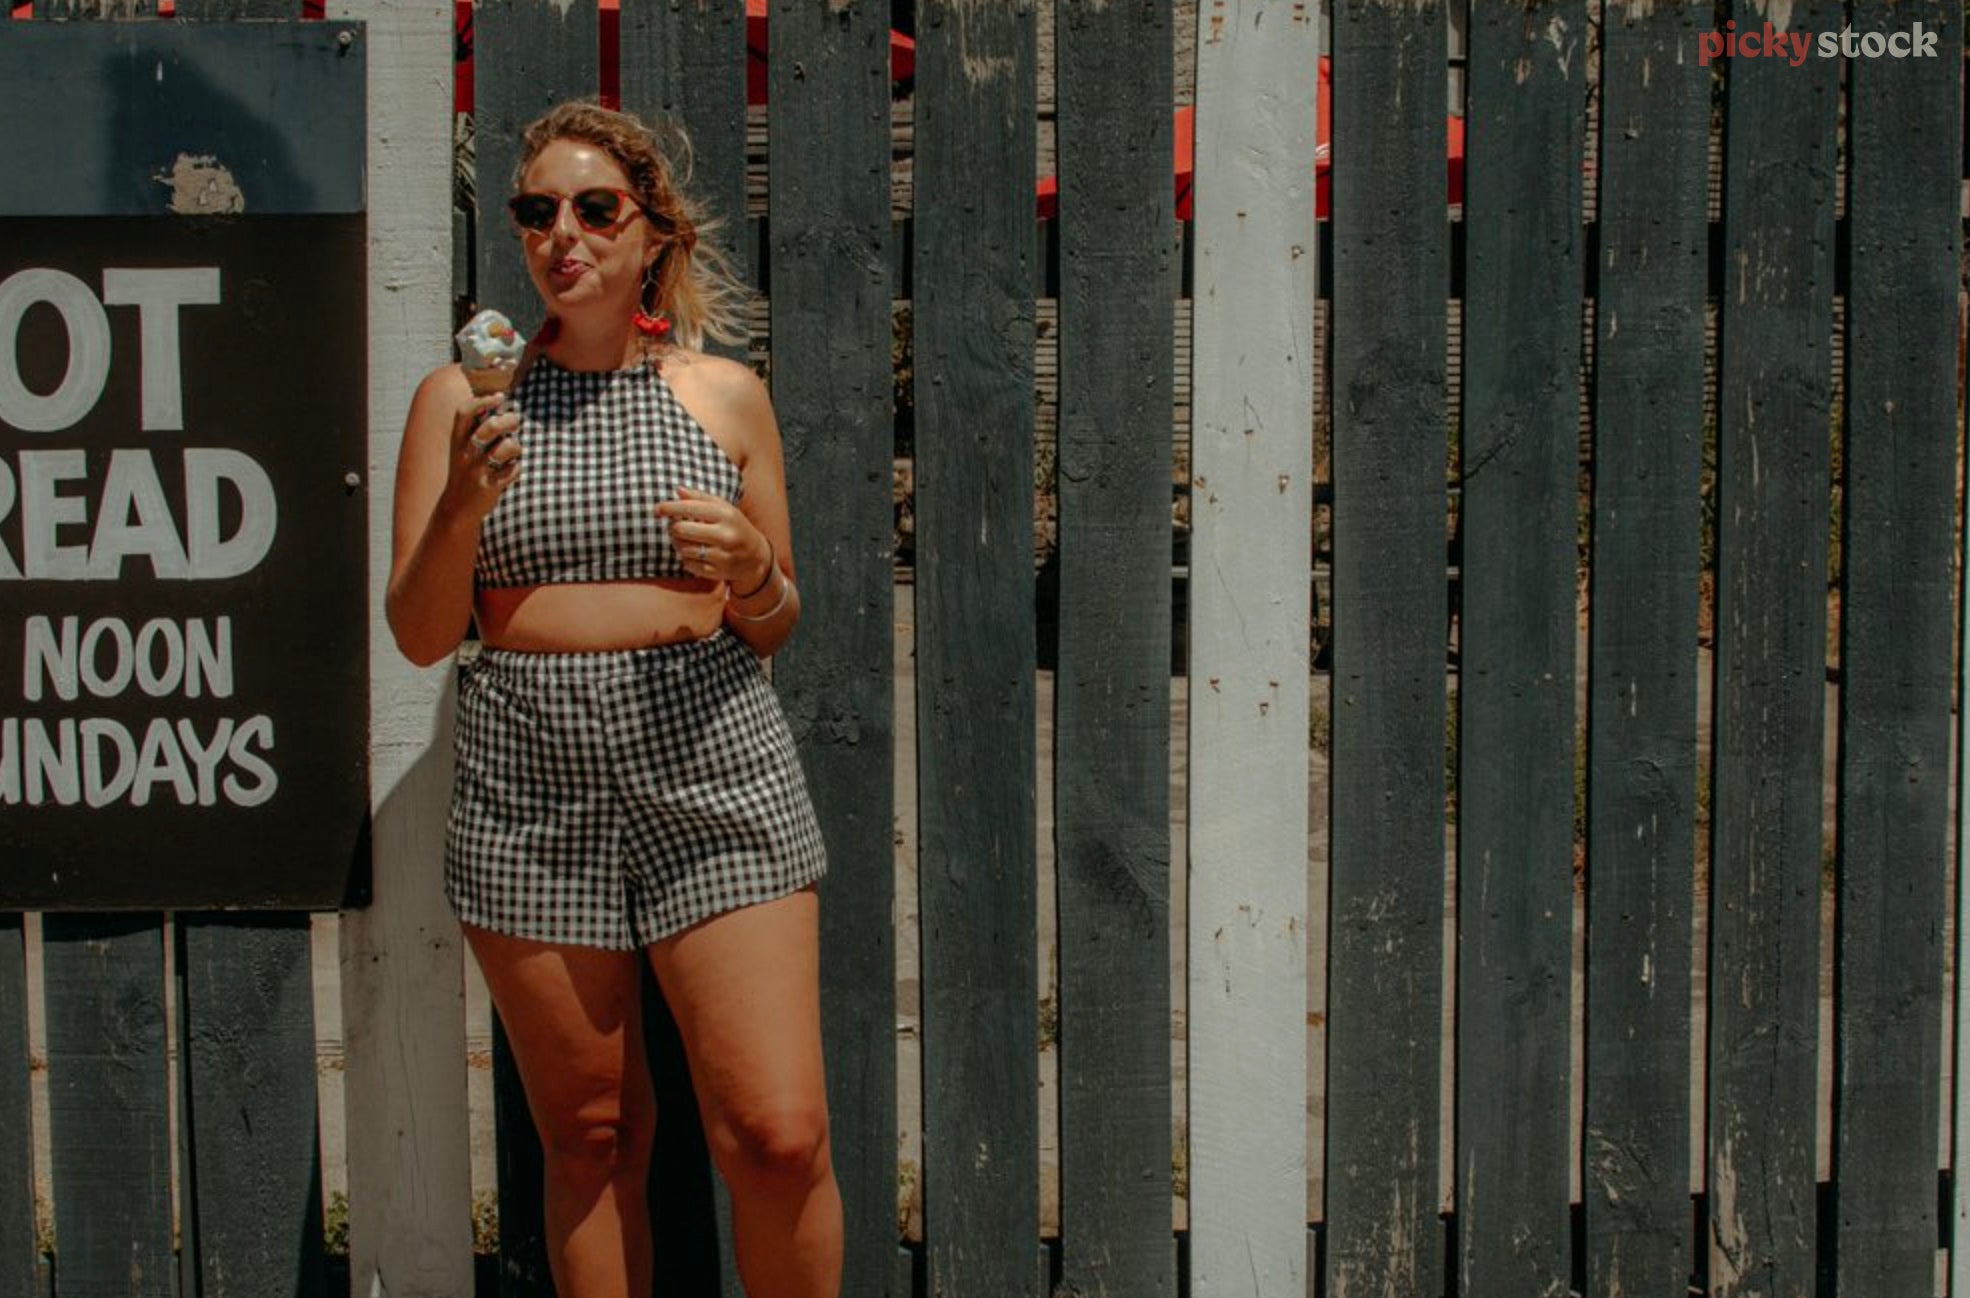 A young lady in a match-ing two piece gingham outfit eats a classic New Zealand ice-cream while standing against a characterful green and white wooden fence. A handwritten "Hot Bread" retro sign sits in frame next to her. 